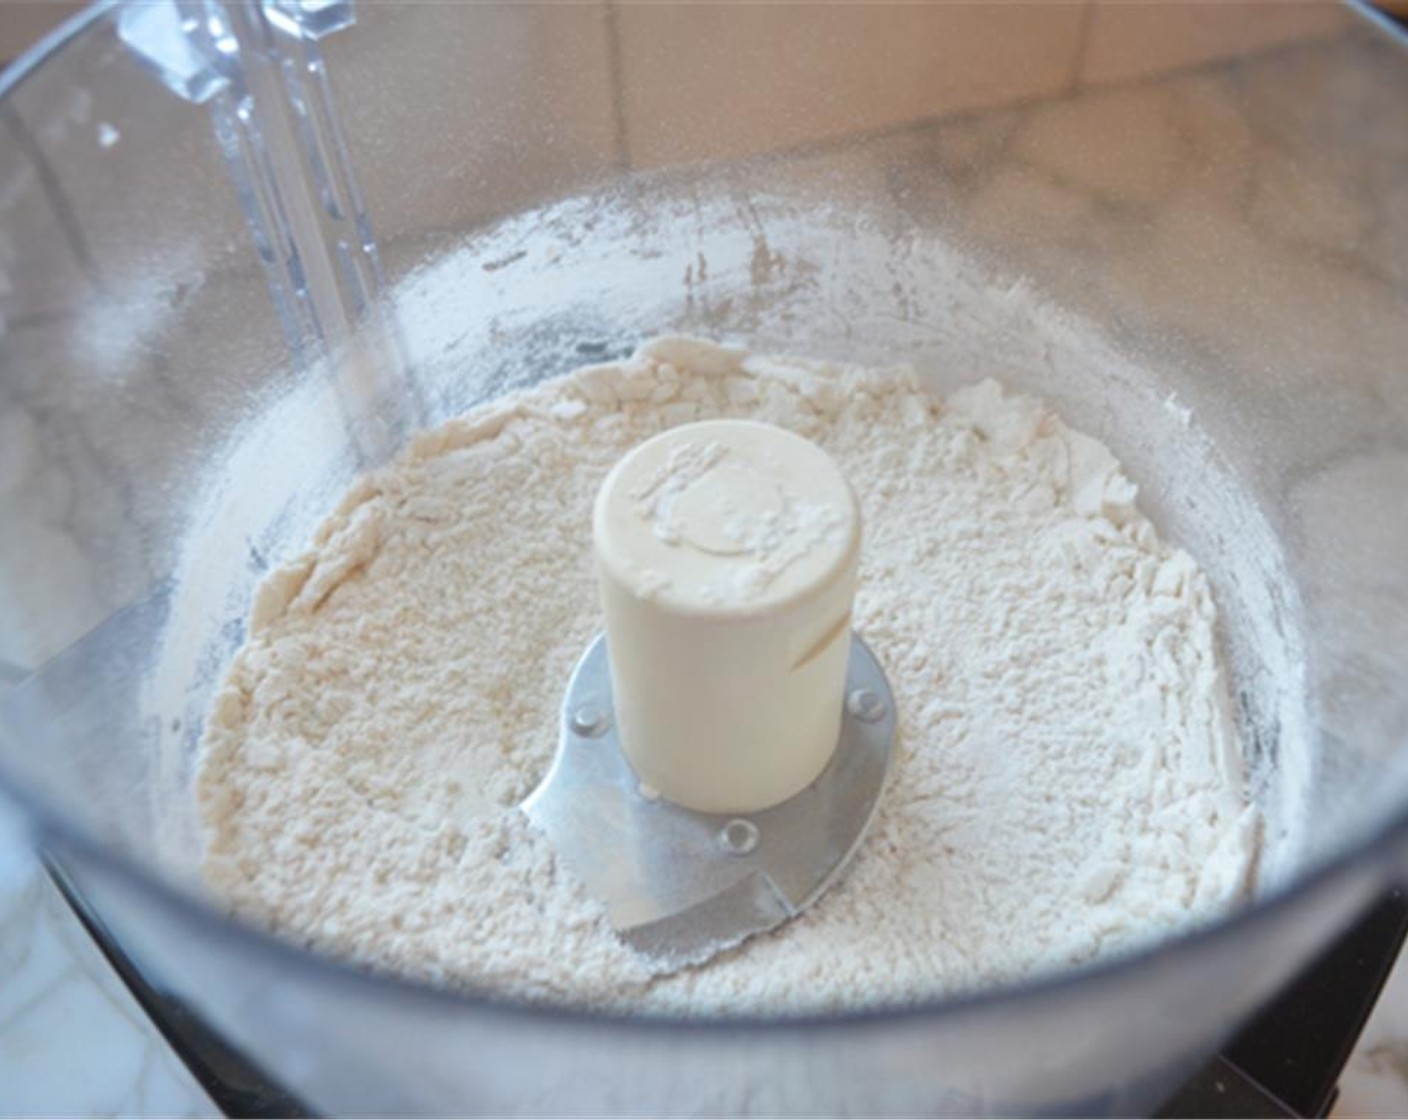 step 1 Combine the All-Purpose Flour (1 1/2 cups), Granulated Sugar (1 Tbsp), Salt (1/2 tsp), and Baking Powder (1/8 tsp) in a food processor and pulse.